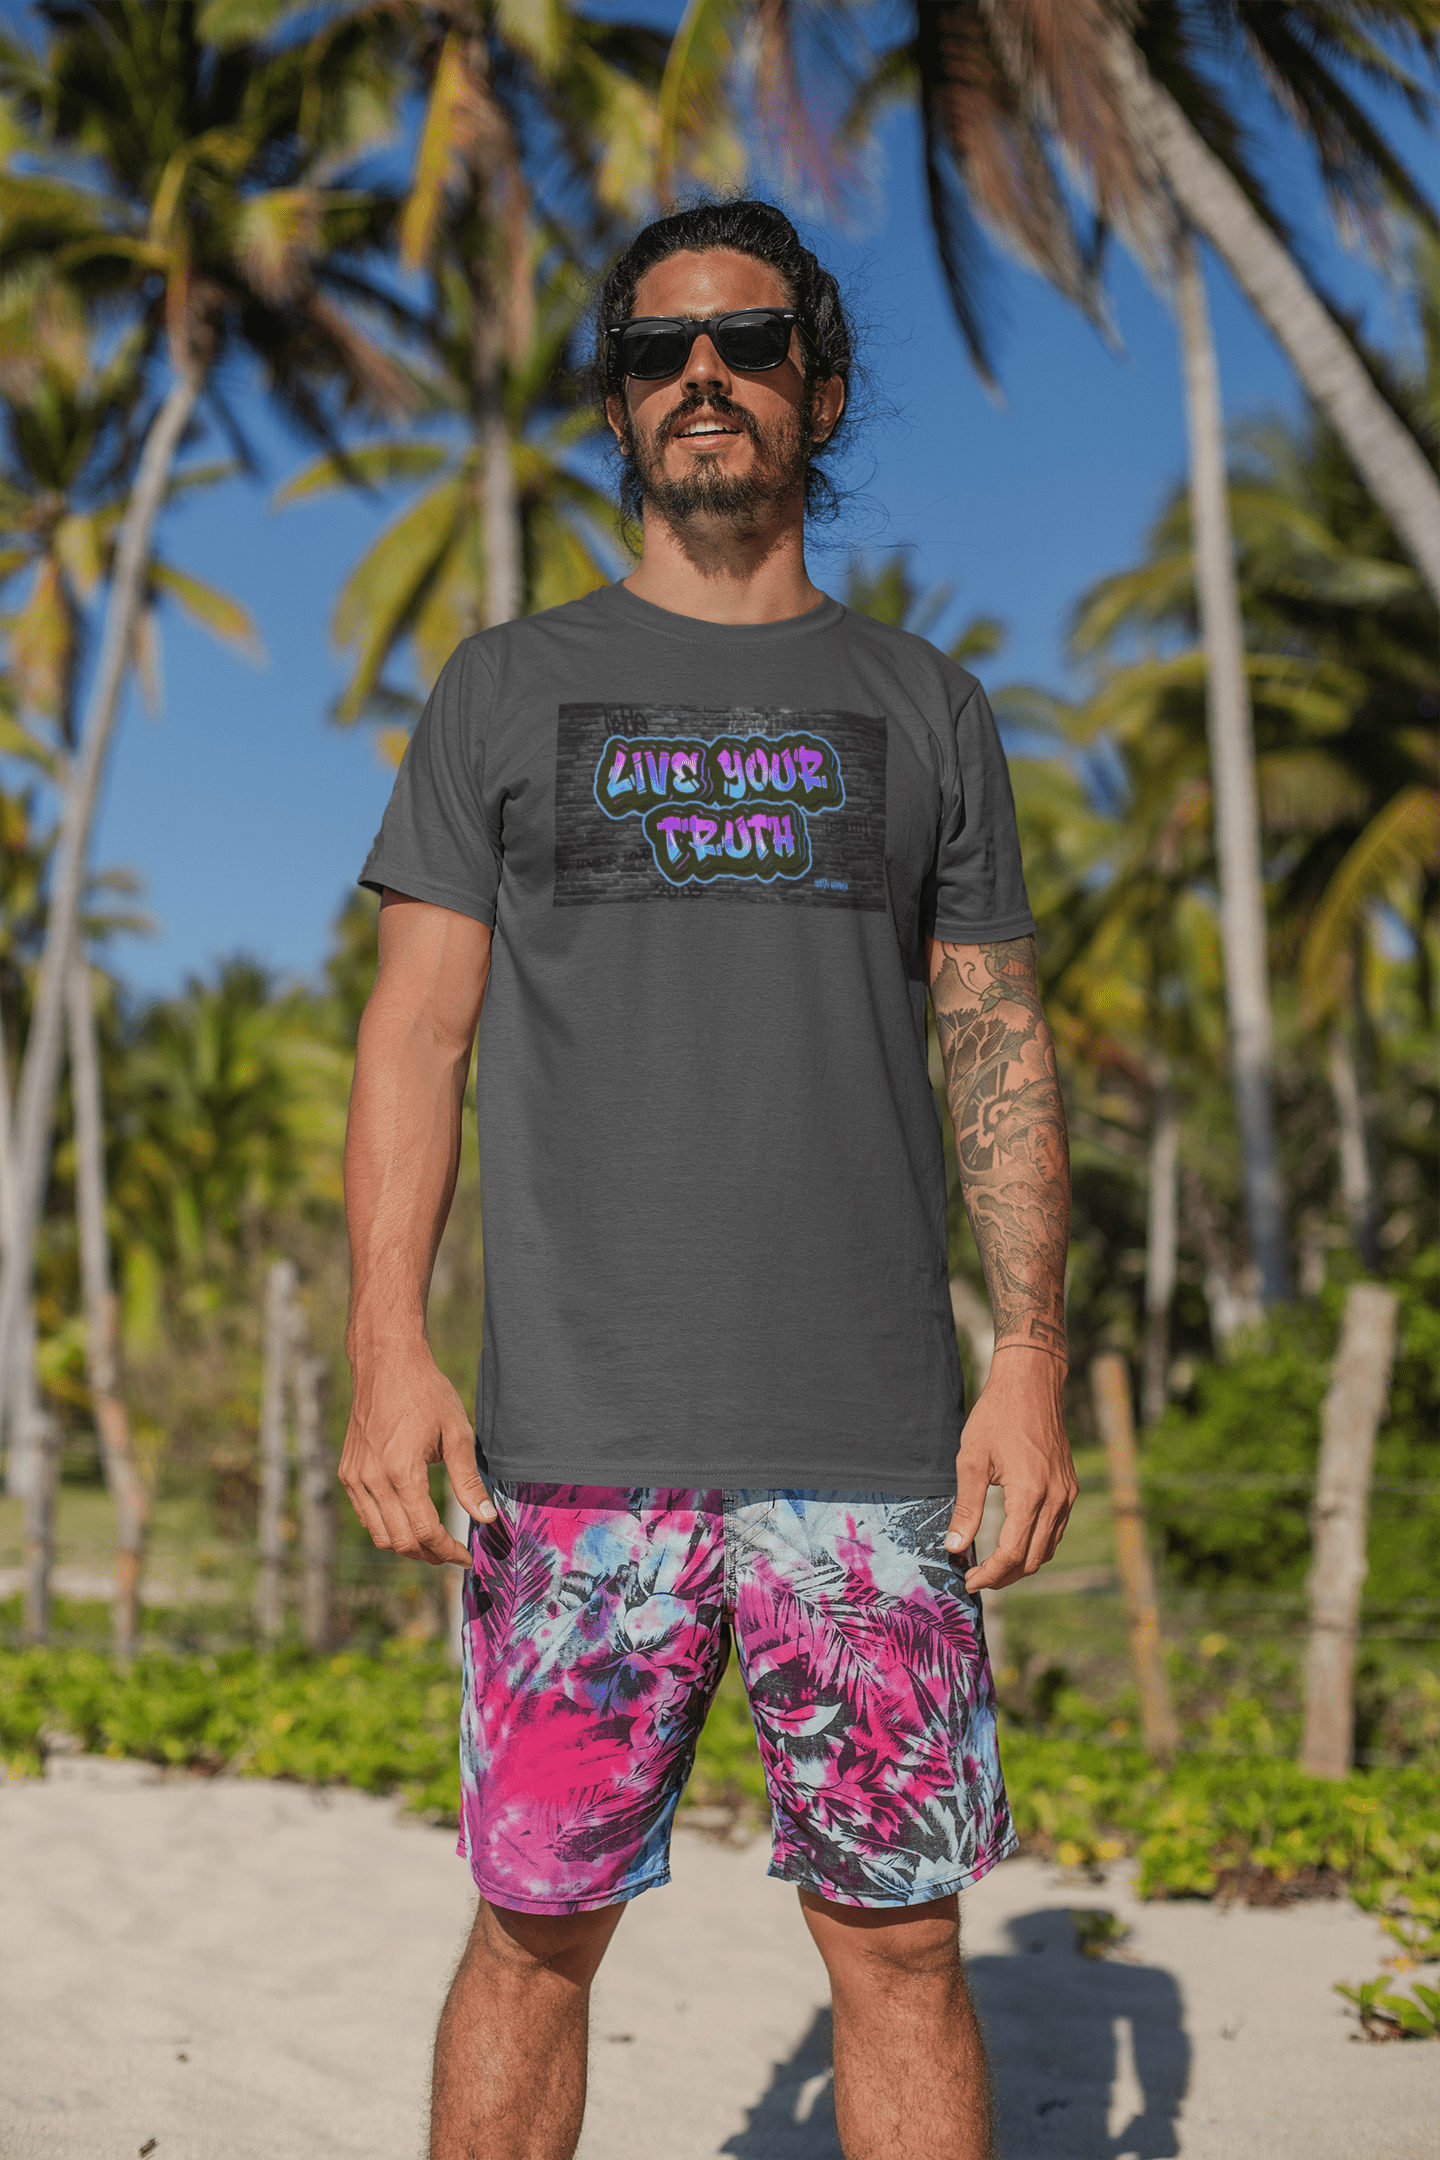 Dark haired man standing on a beach with palm trees in the back of him. He is facing the water, it’s a sunny day. He is wearing black sunglasses with a gay pride t-shirt that has a front graffiti graphic that says “Live your truth.” The LGBTQ shirt is from Same Apparel gay clothing brand.